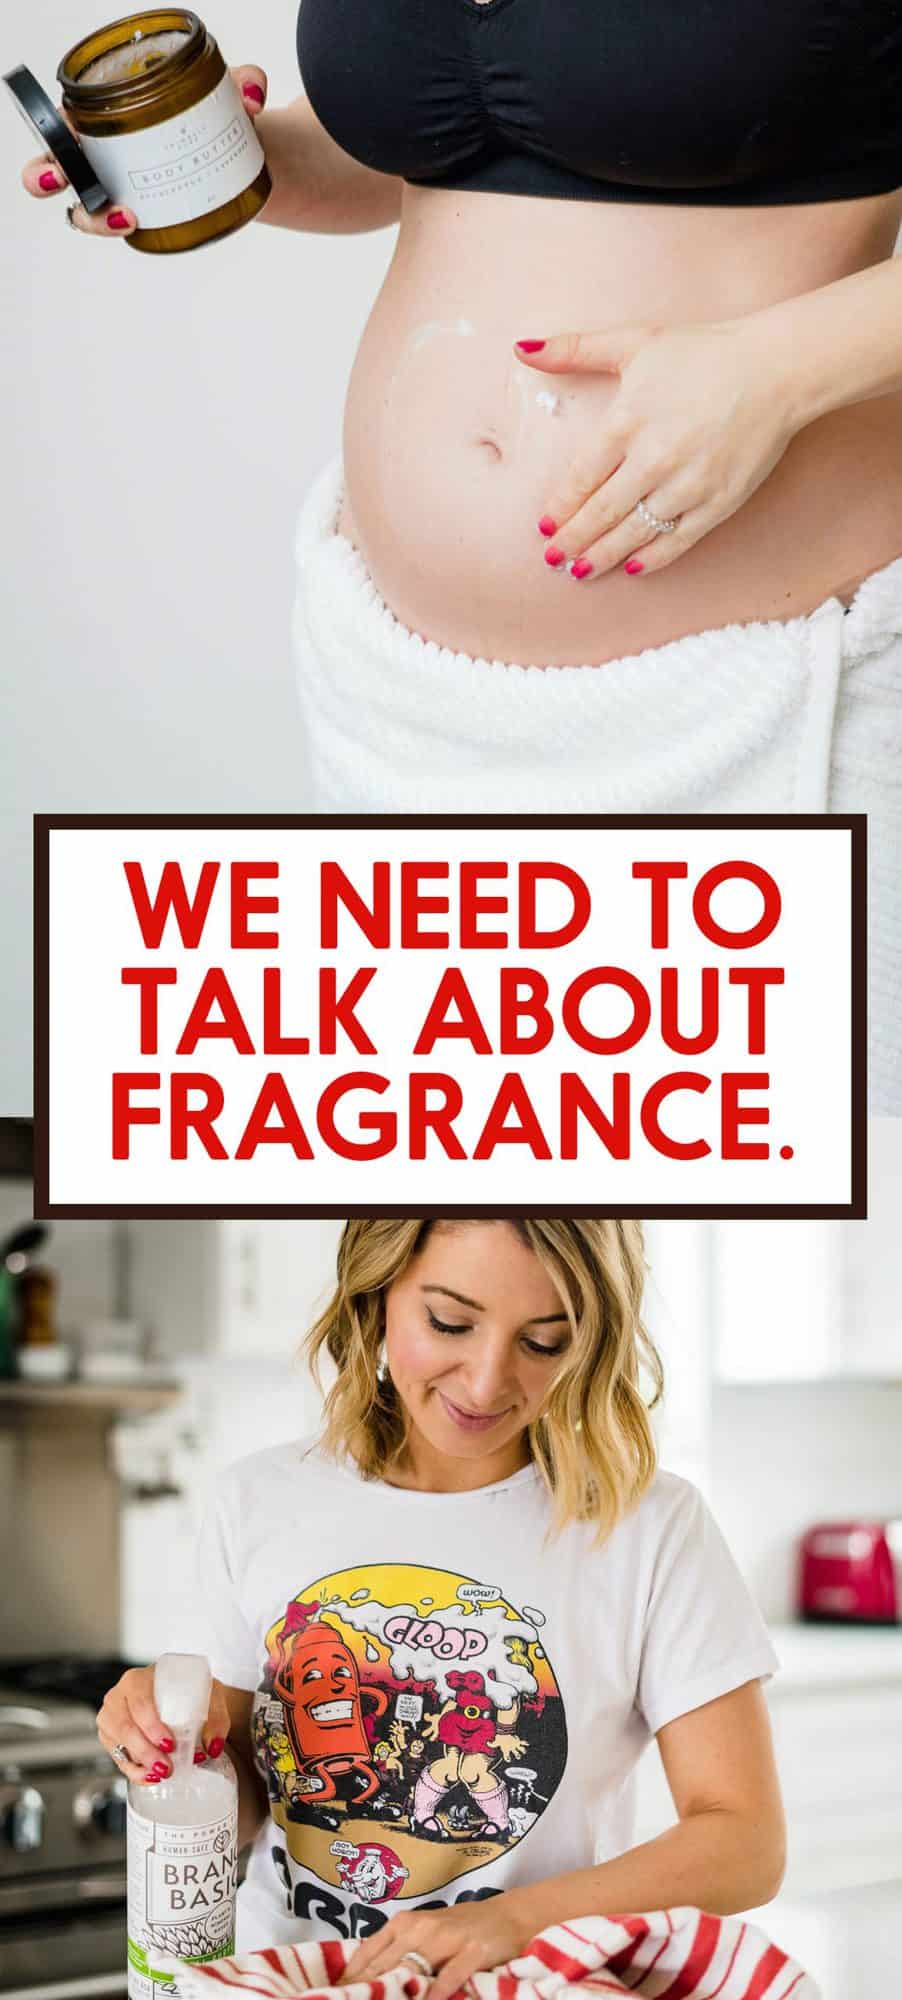 We need to talk about fragrance